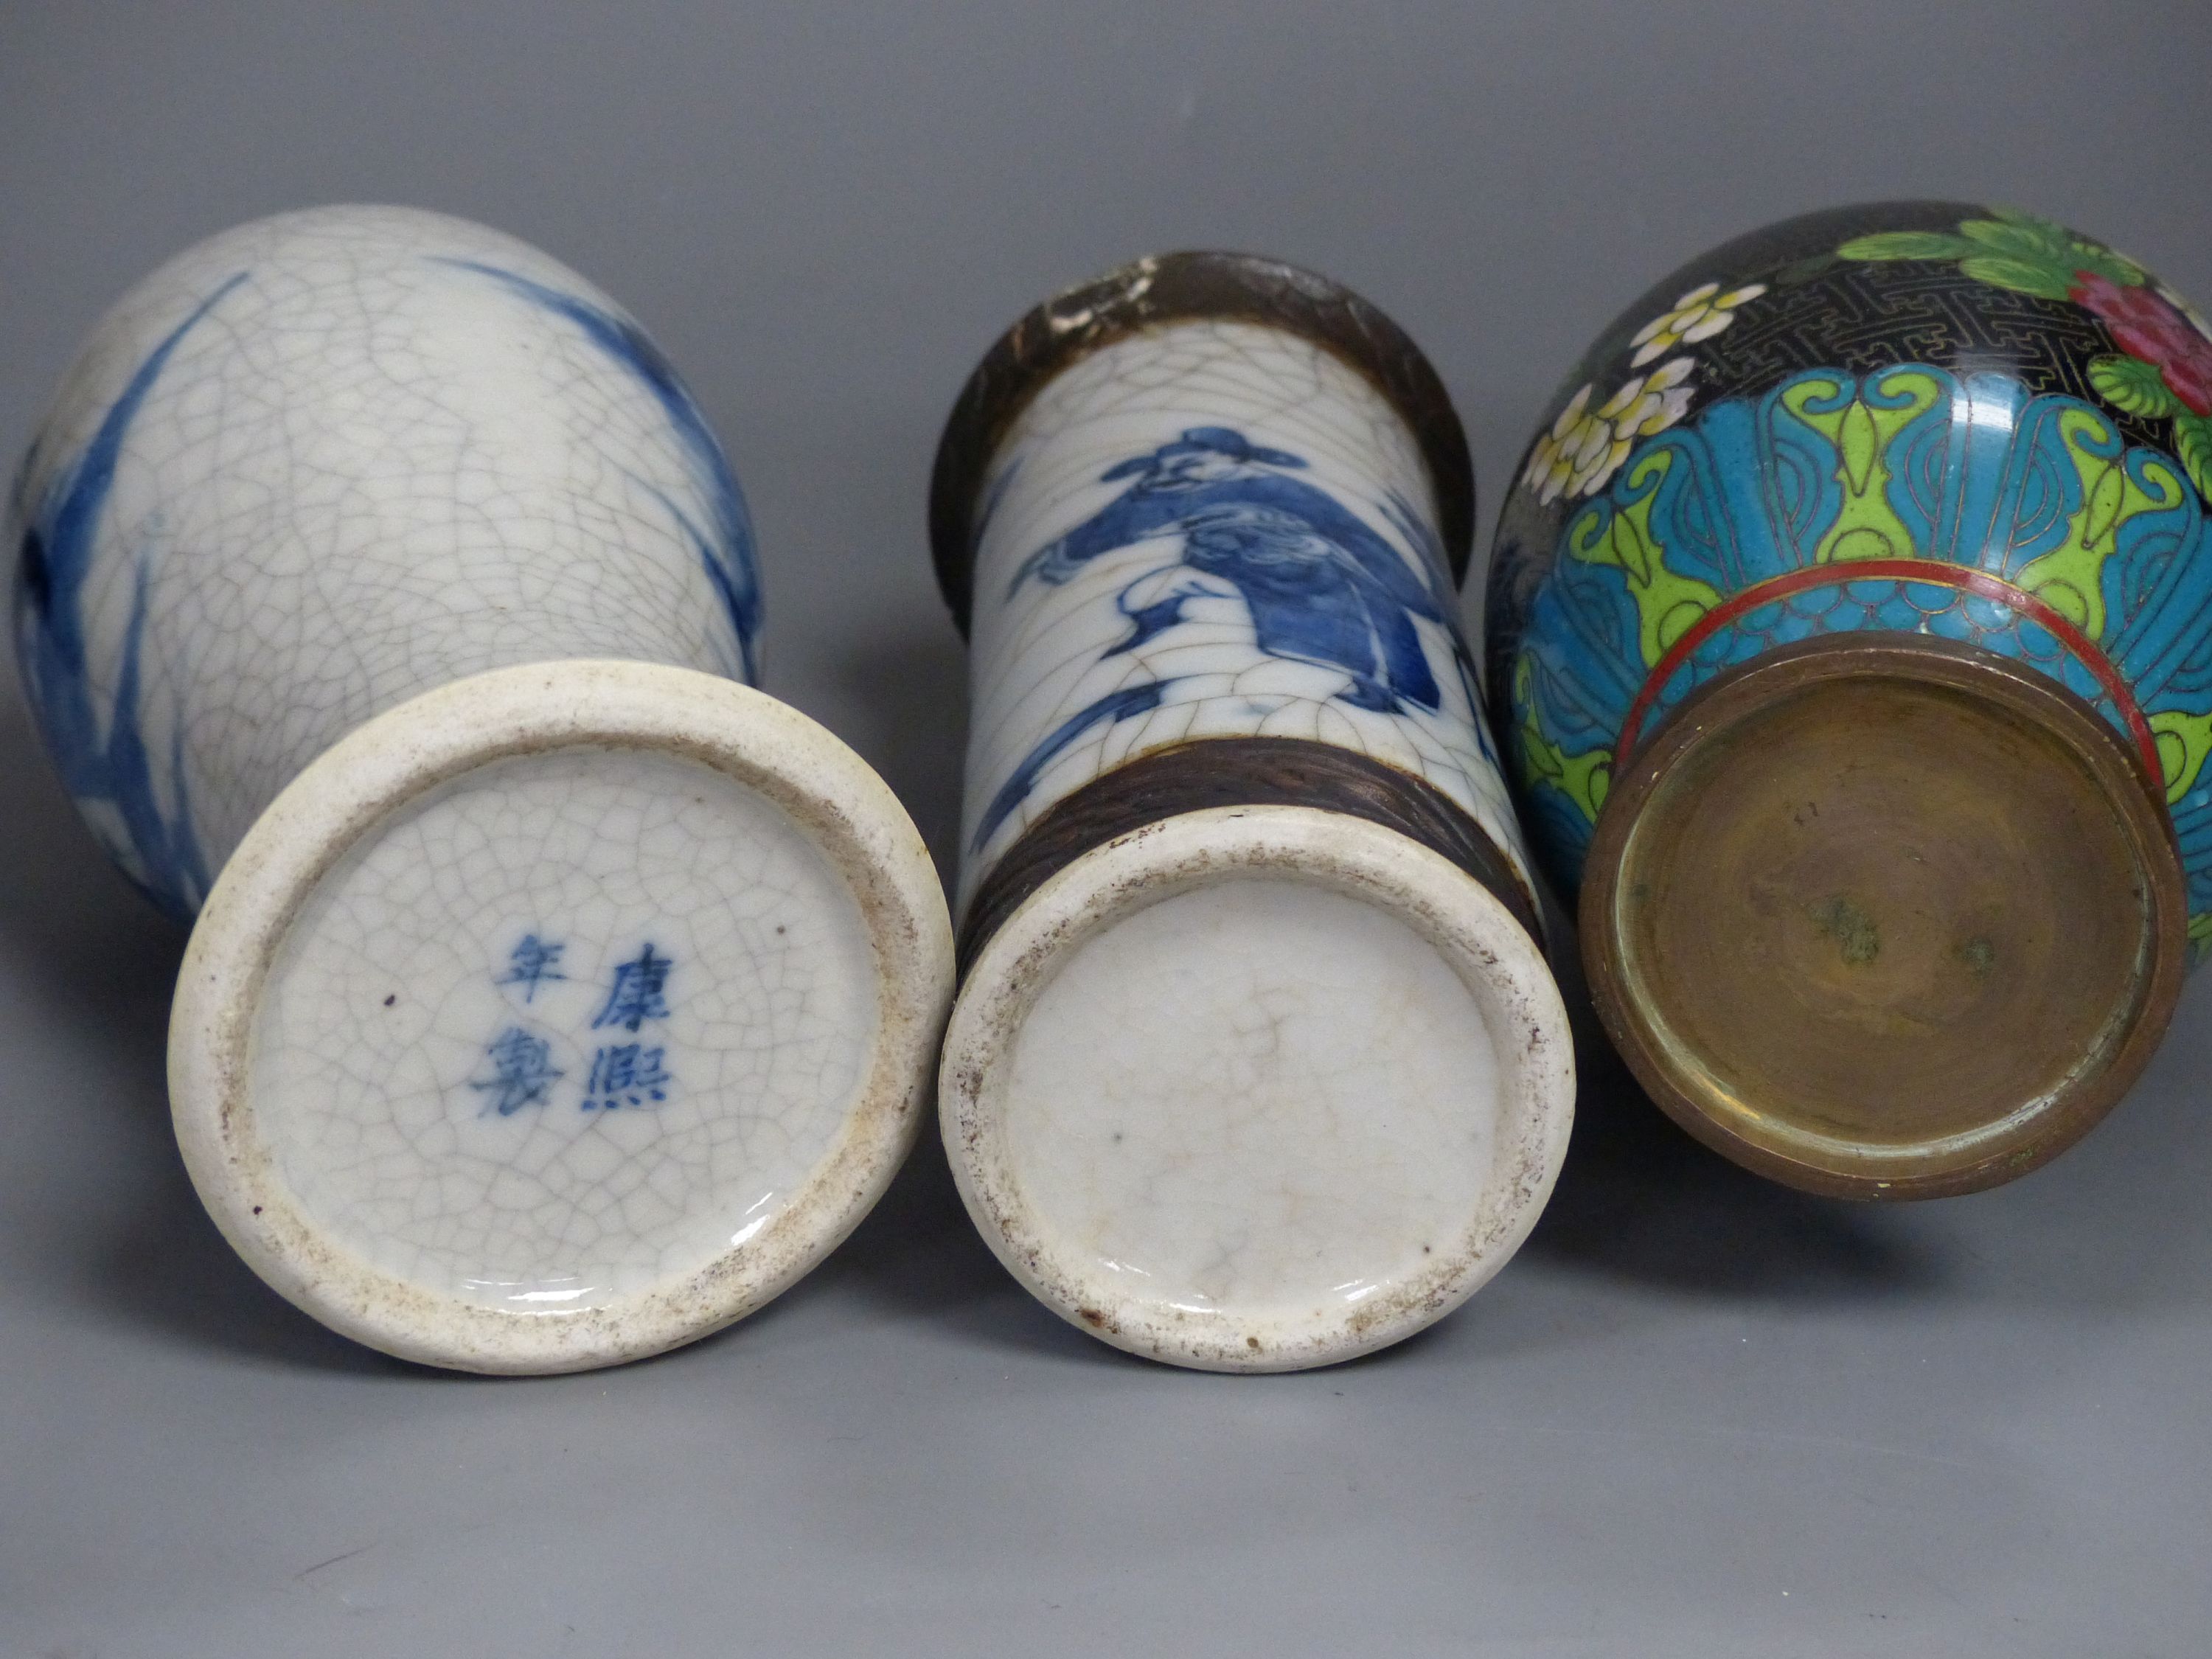 Three Chinese blue and white vases, a cloisonne enamel vase, another vase and a soapstone figure